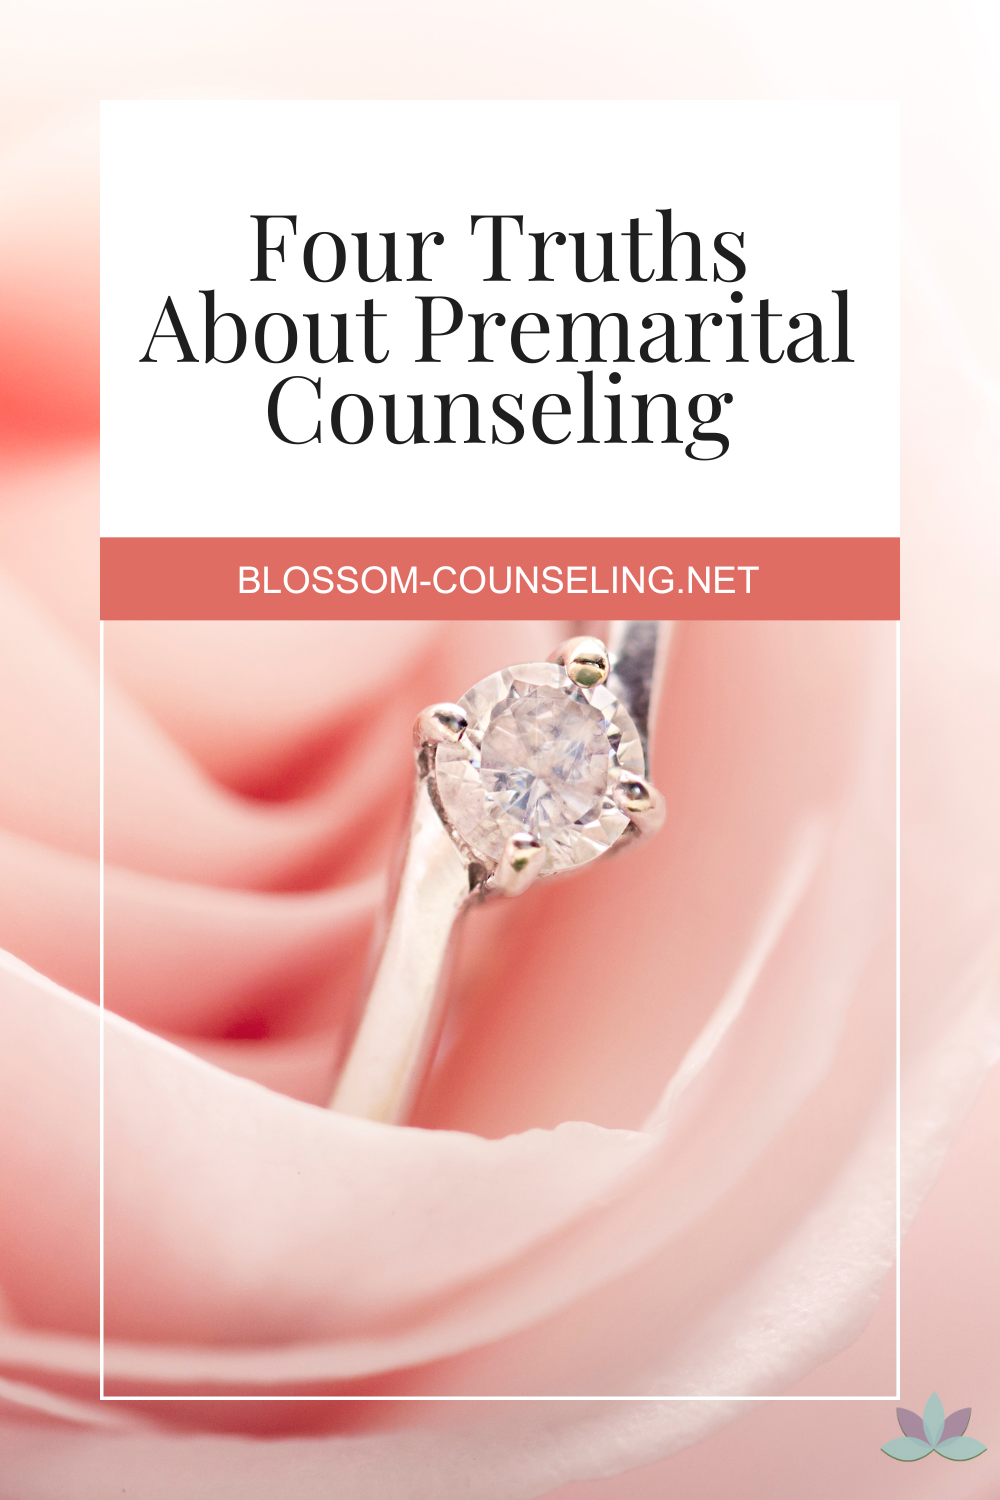 Four Truths About Premarital Counseling